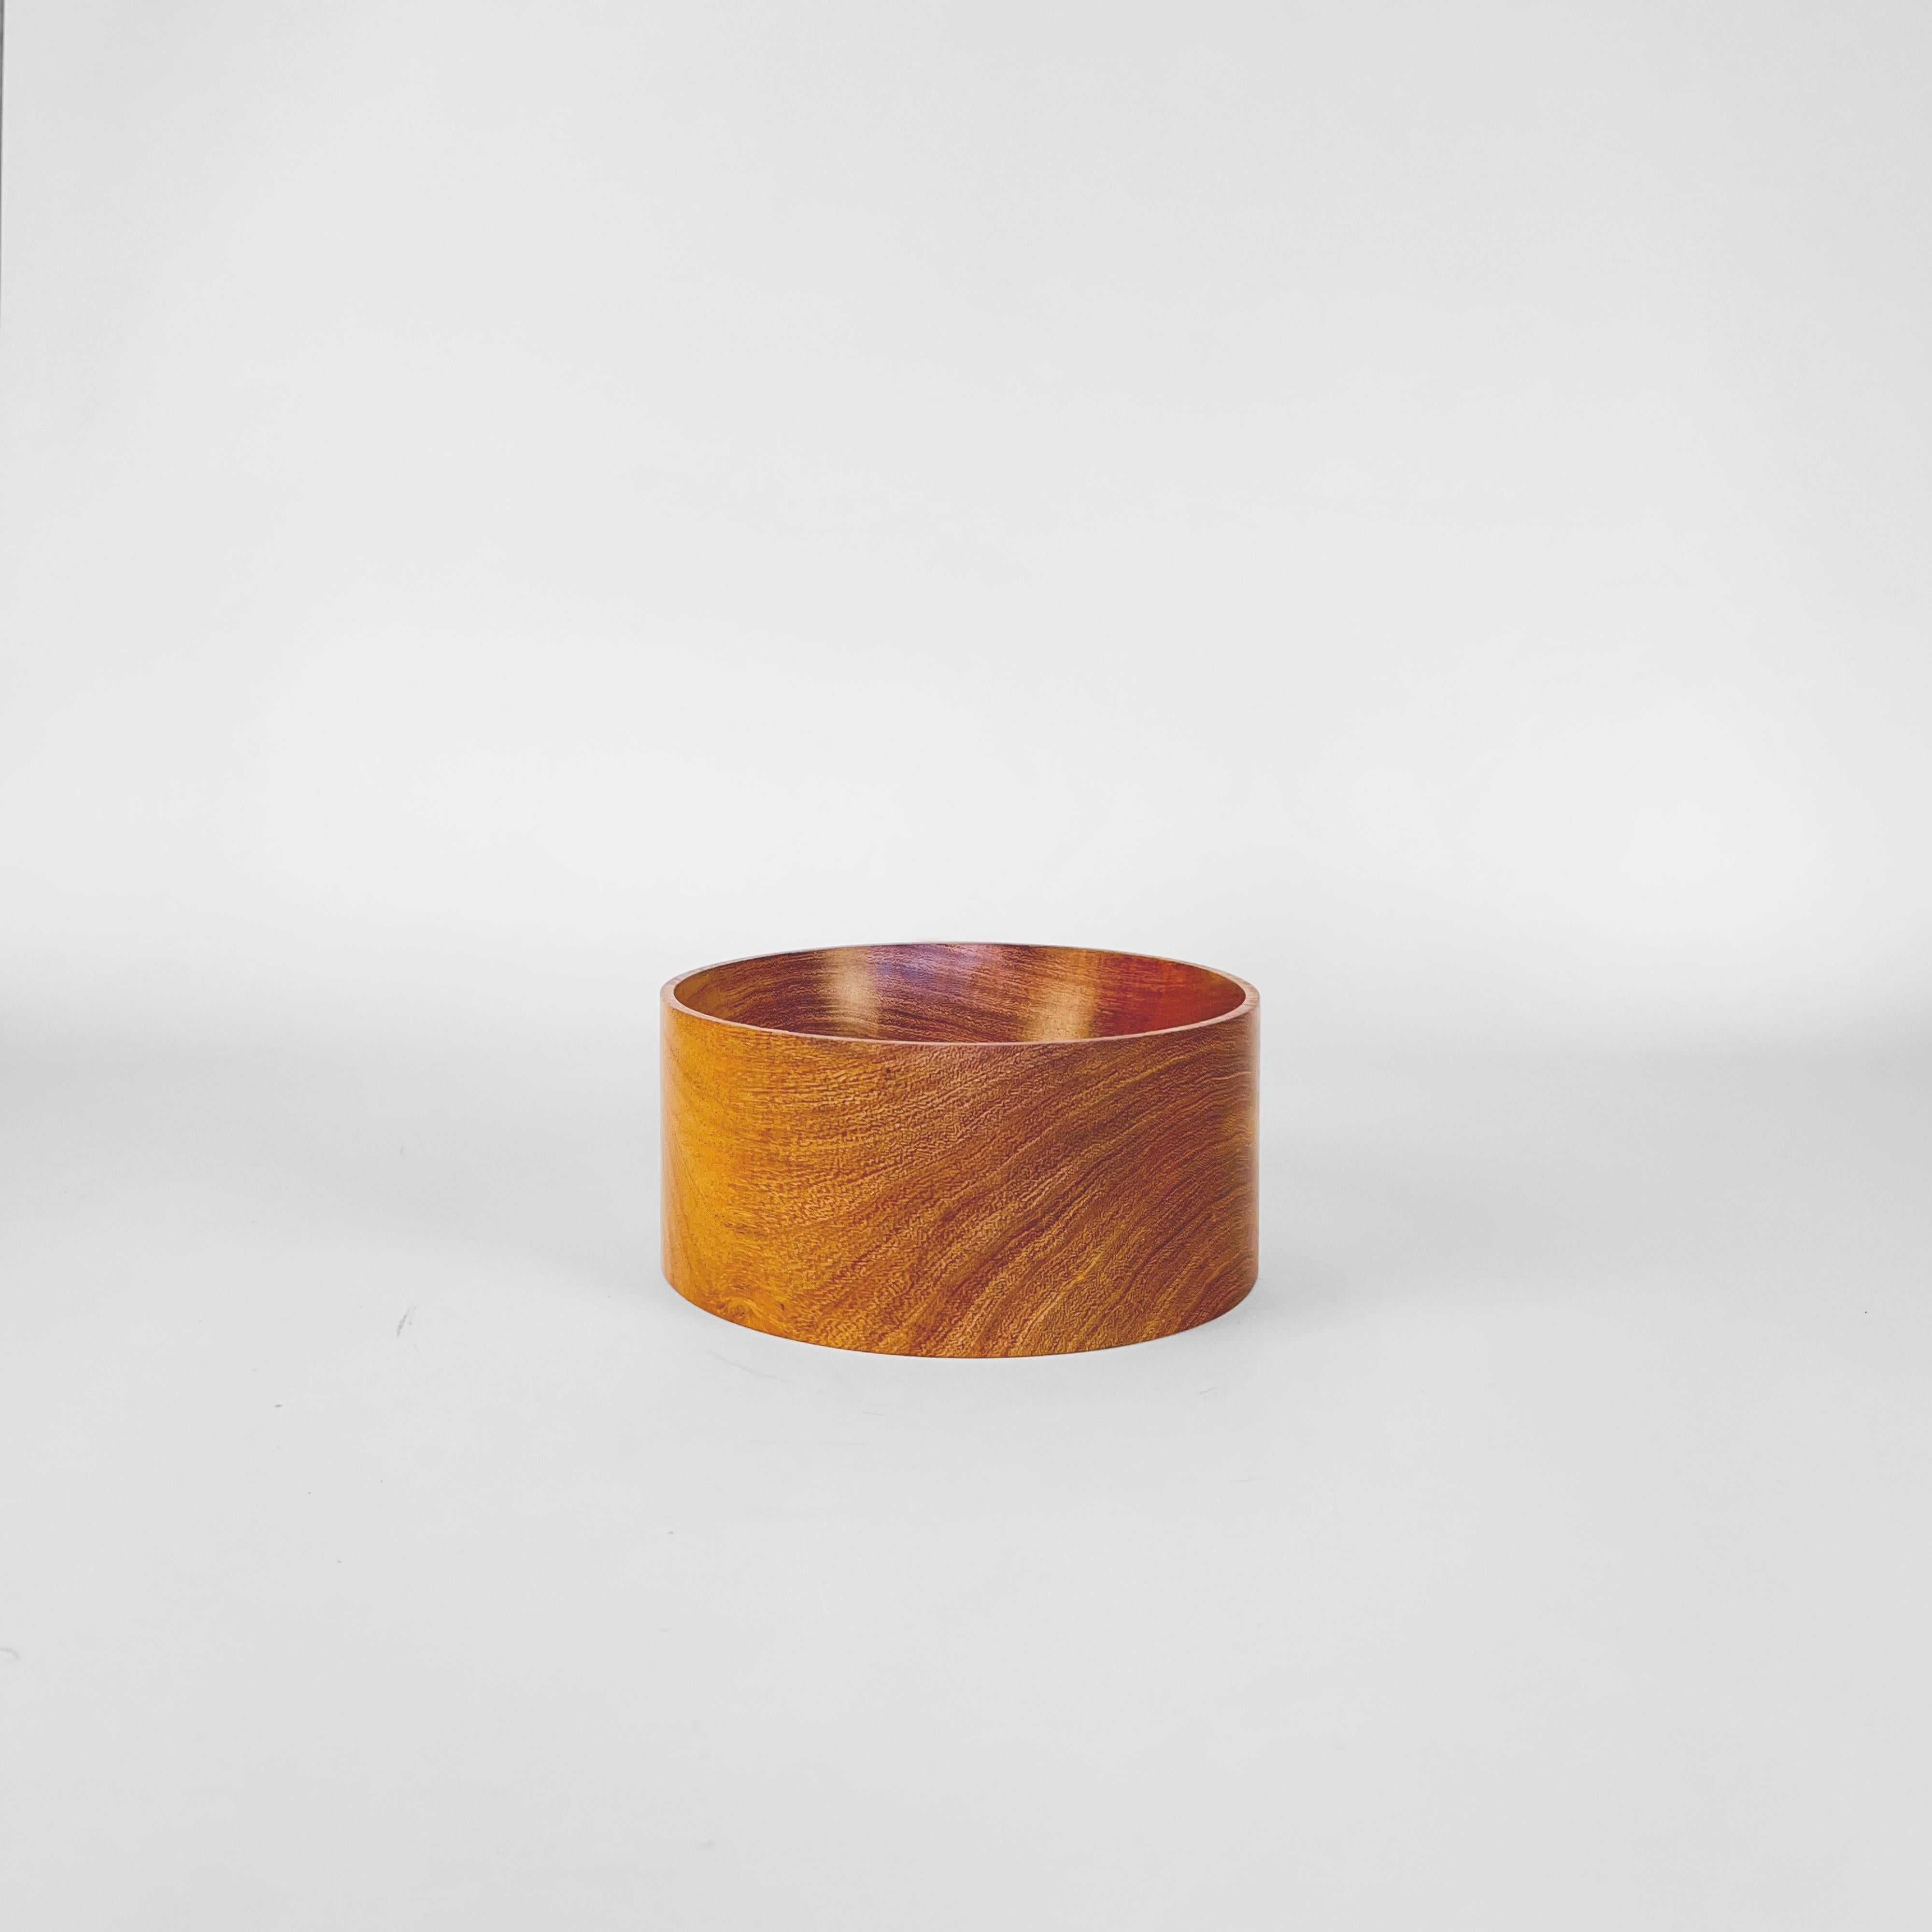 Hand-turned wooden bowl by Alta Pampa, Argentina.
The piece is made in Quebracho (Hardwood). The smooth finish reveals the material beautiful grain.
Stamped on the base.